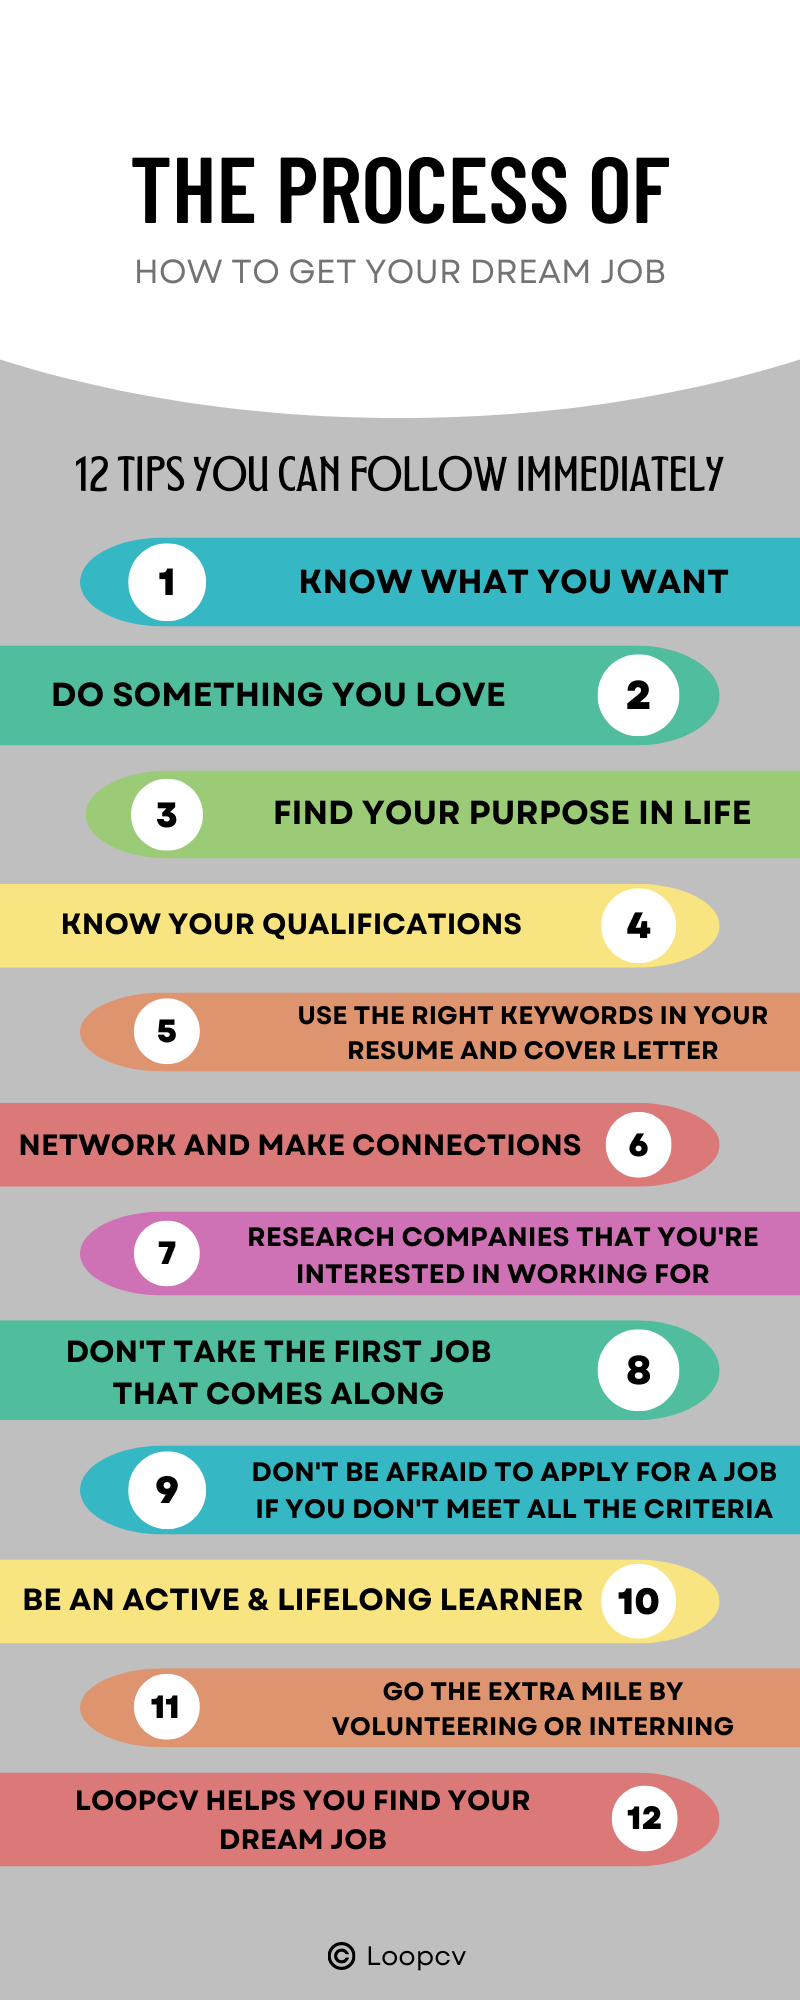 How to get your dream job - Infographic